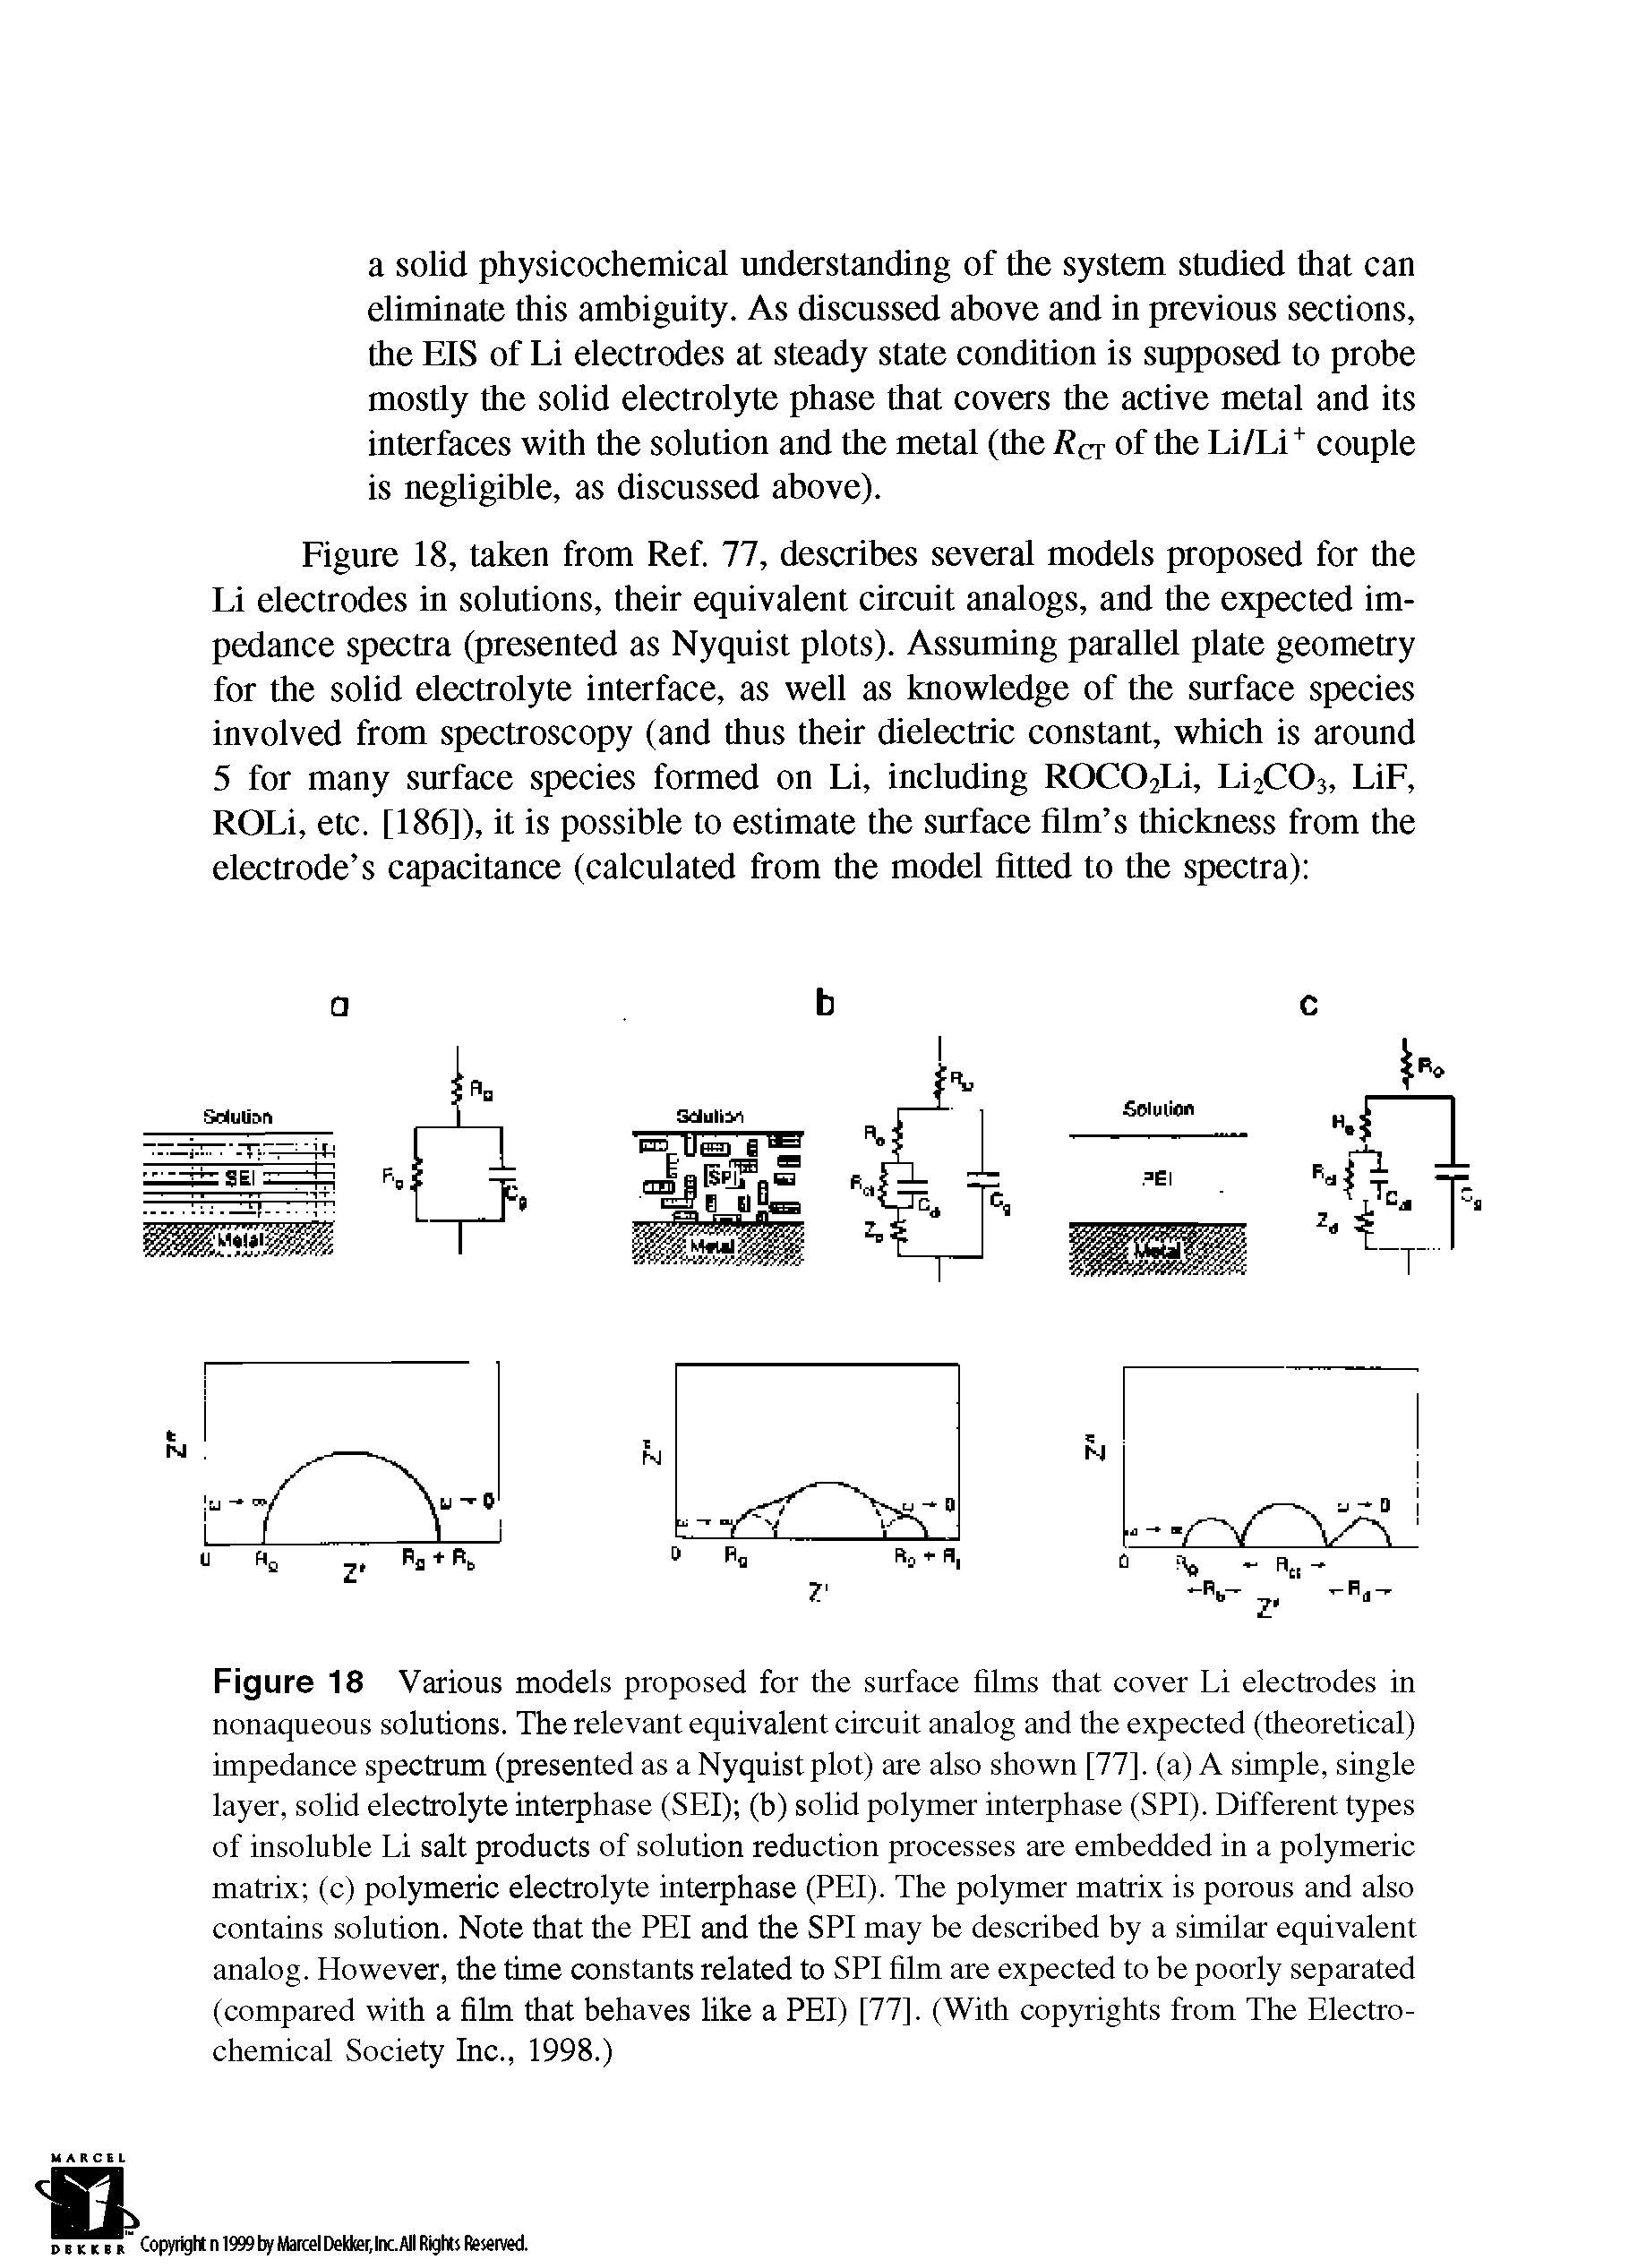 Figure 18, taken from Ref. 77, describes several models proposed for the Li electrodes in solutions, their equivalent circuit analogs, and the expected impedance spectra (presented as Nyquist plots). Assuming parallel plate geometry for the solid electrolyte interface, as well as knowledge of the surface species involved from spectroscopy (and thus their dielectric constant, which is around 5 for many surface species formed on Li, including R0C02Li, Li2C03, LiF, ROLi, etc. [186]), it is possible to estimate the surface film s thickness from the electrode s capacitance (calculated from the model fitted to the spectra) ...